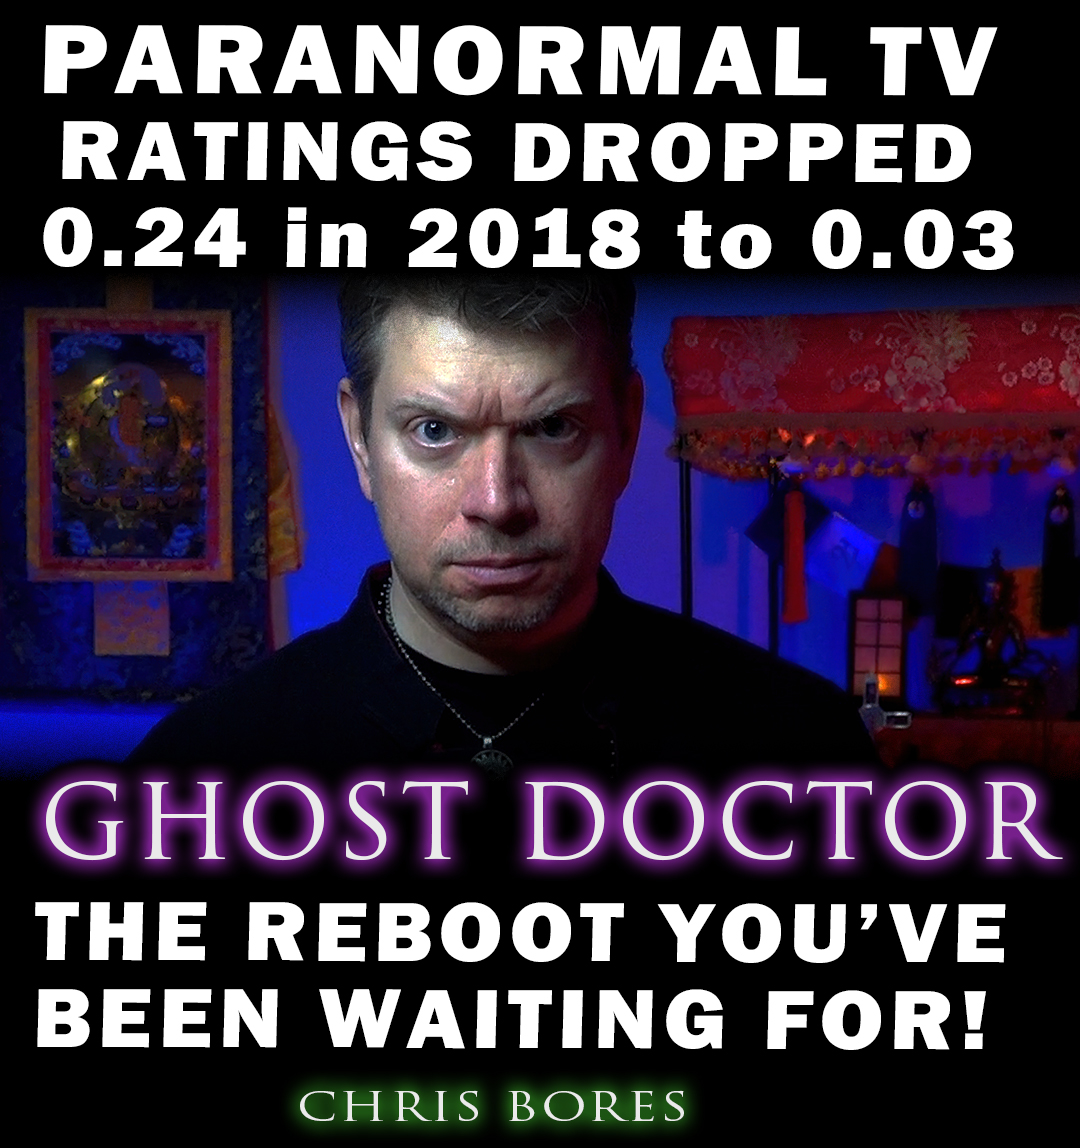 Truth! Can't bury me forever #ghost #paranormal #ghostdoctor #ghostbehaviorist #paranormal #podcast #ghoststories #ghoststories #ghosthunt #spiritualwarfare #ghostadventures #travelchannel #discovery